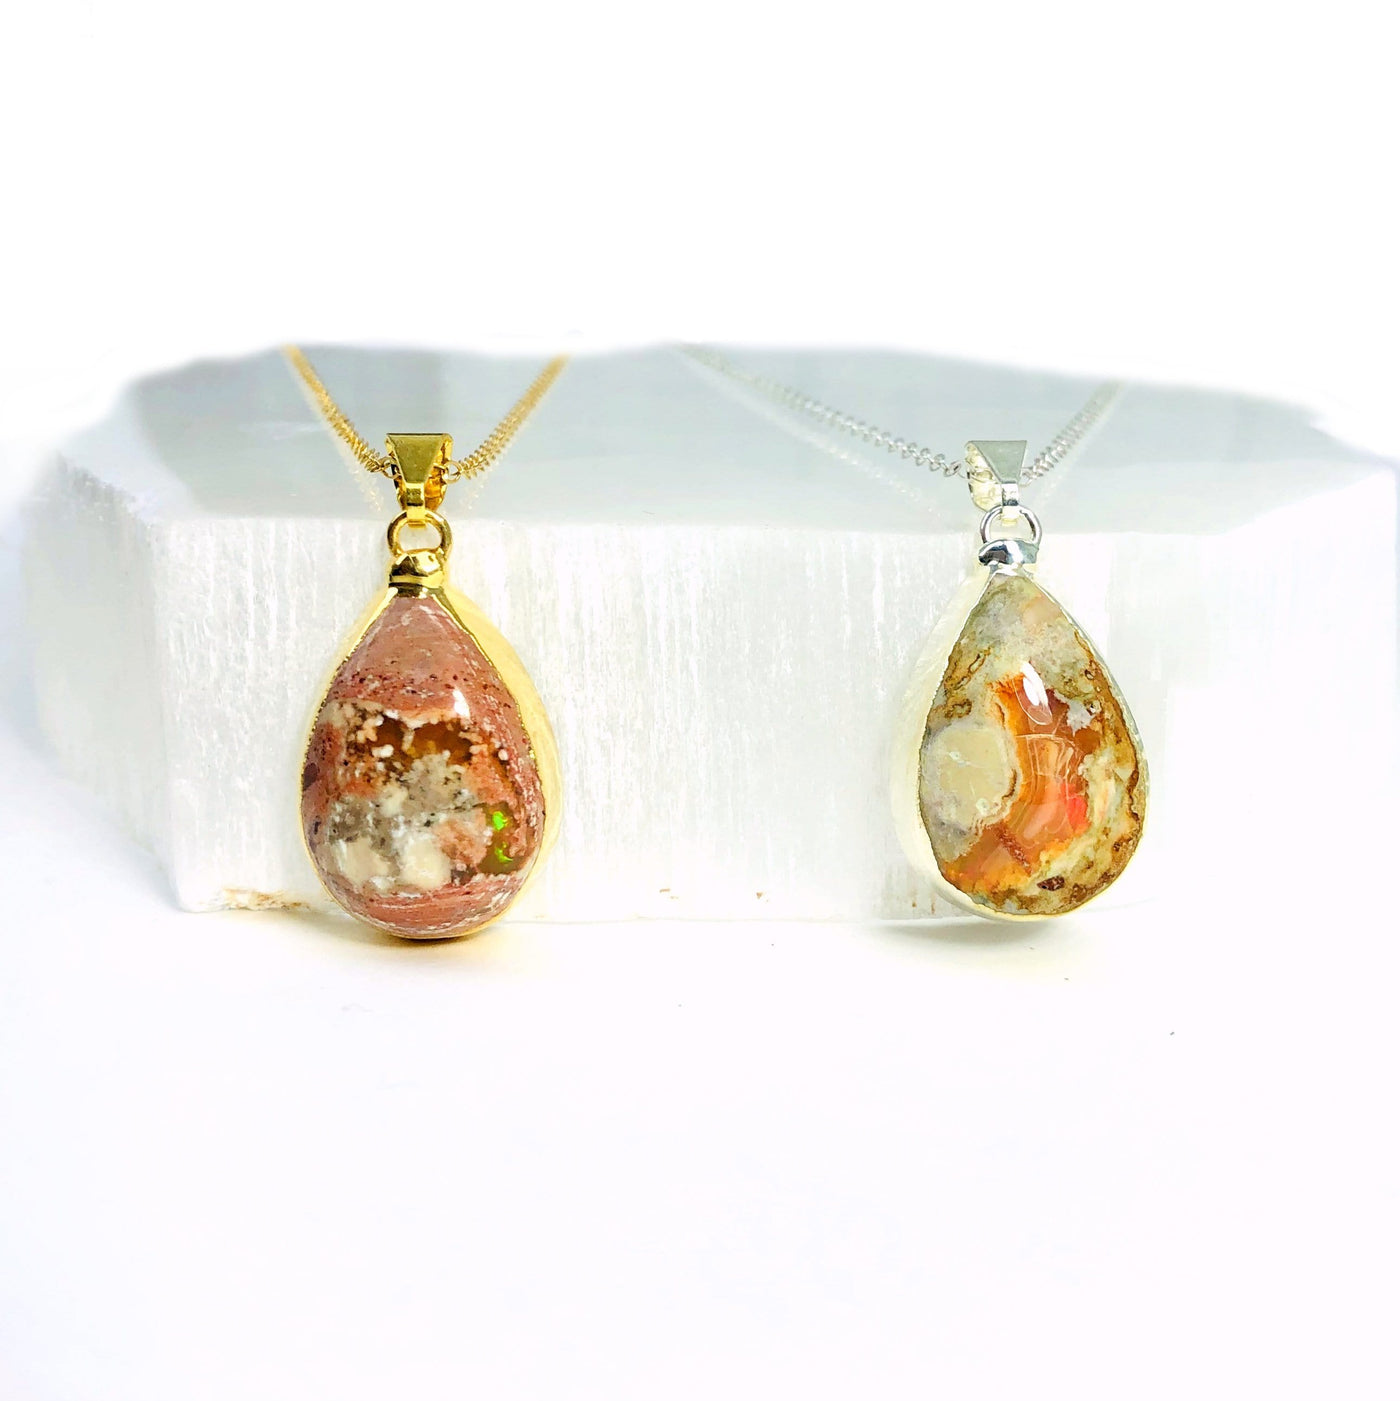 Mexican opal pendants on white background